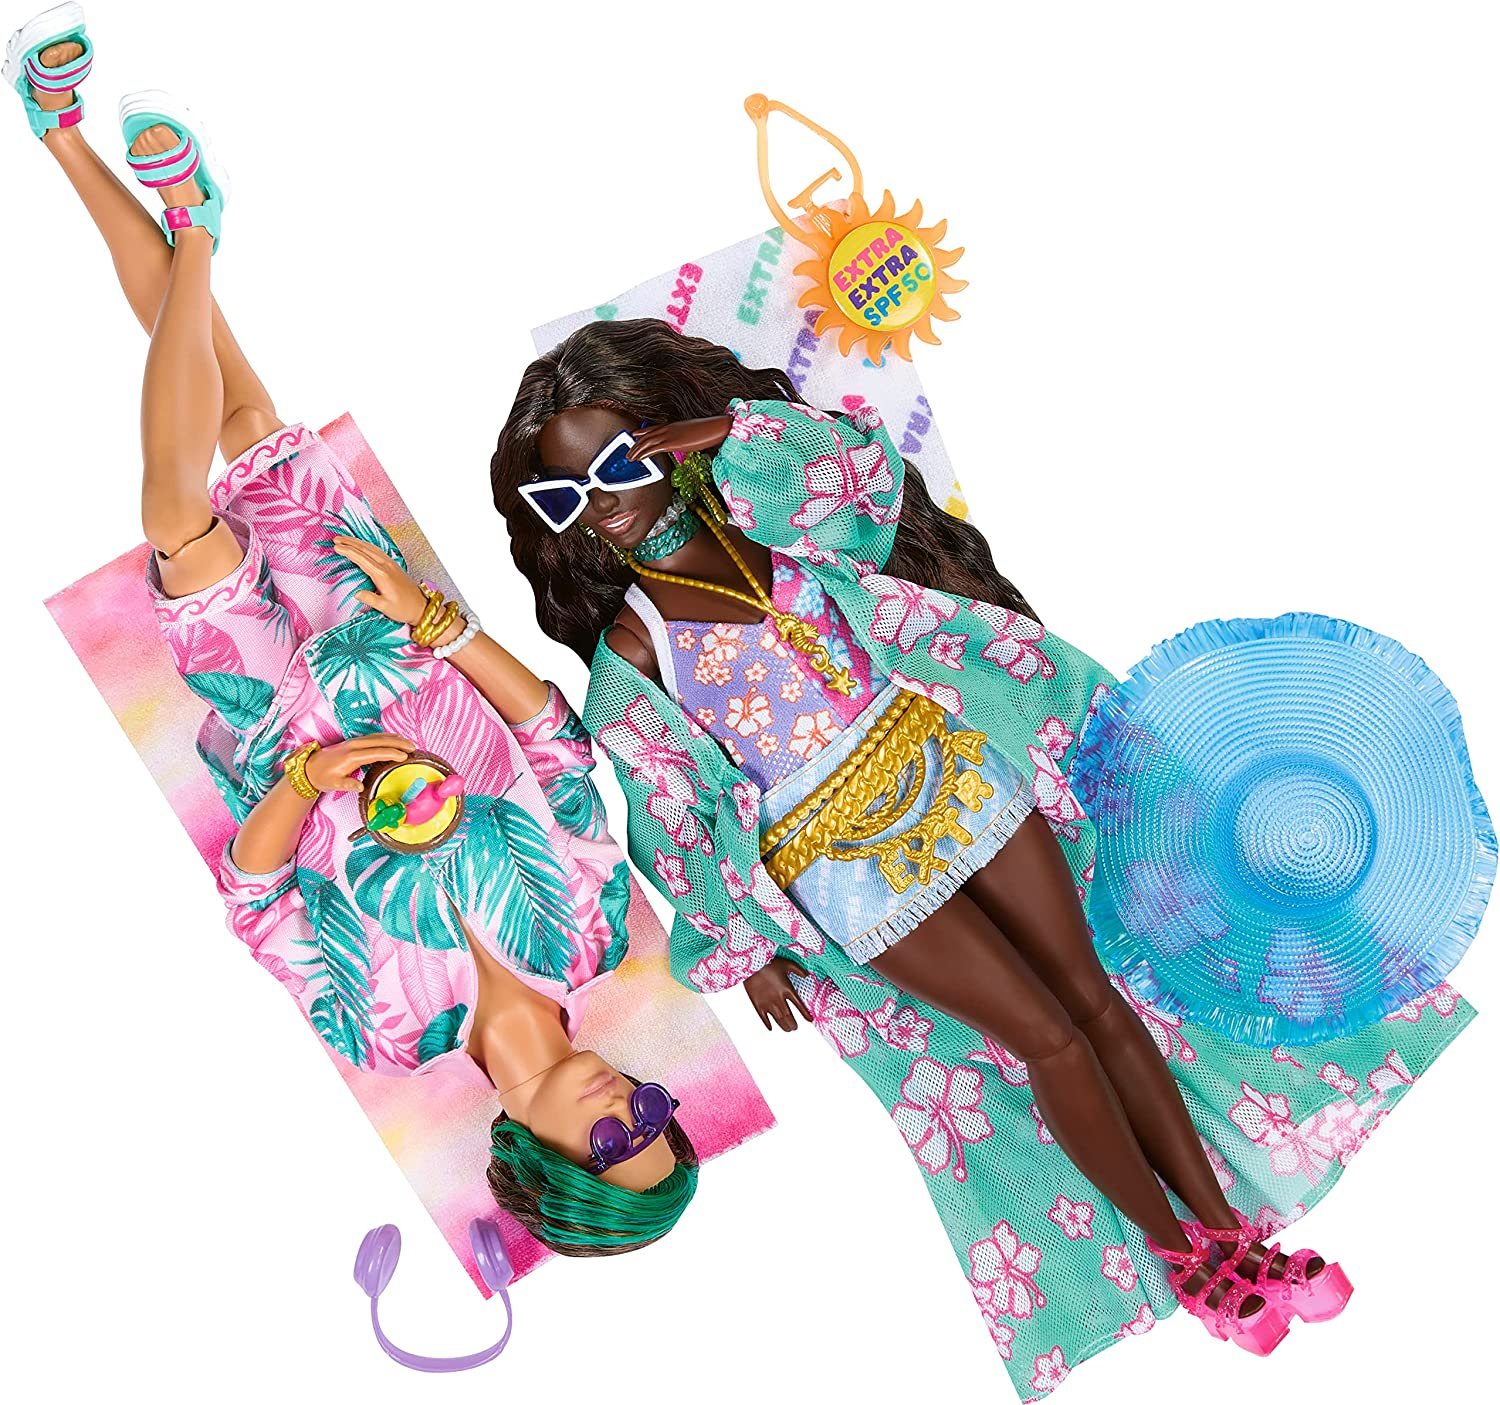 1682923812-youloveit-com-barbie-extra-fly-beach-doll14